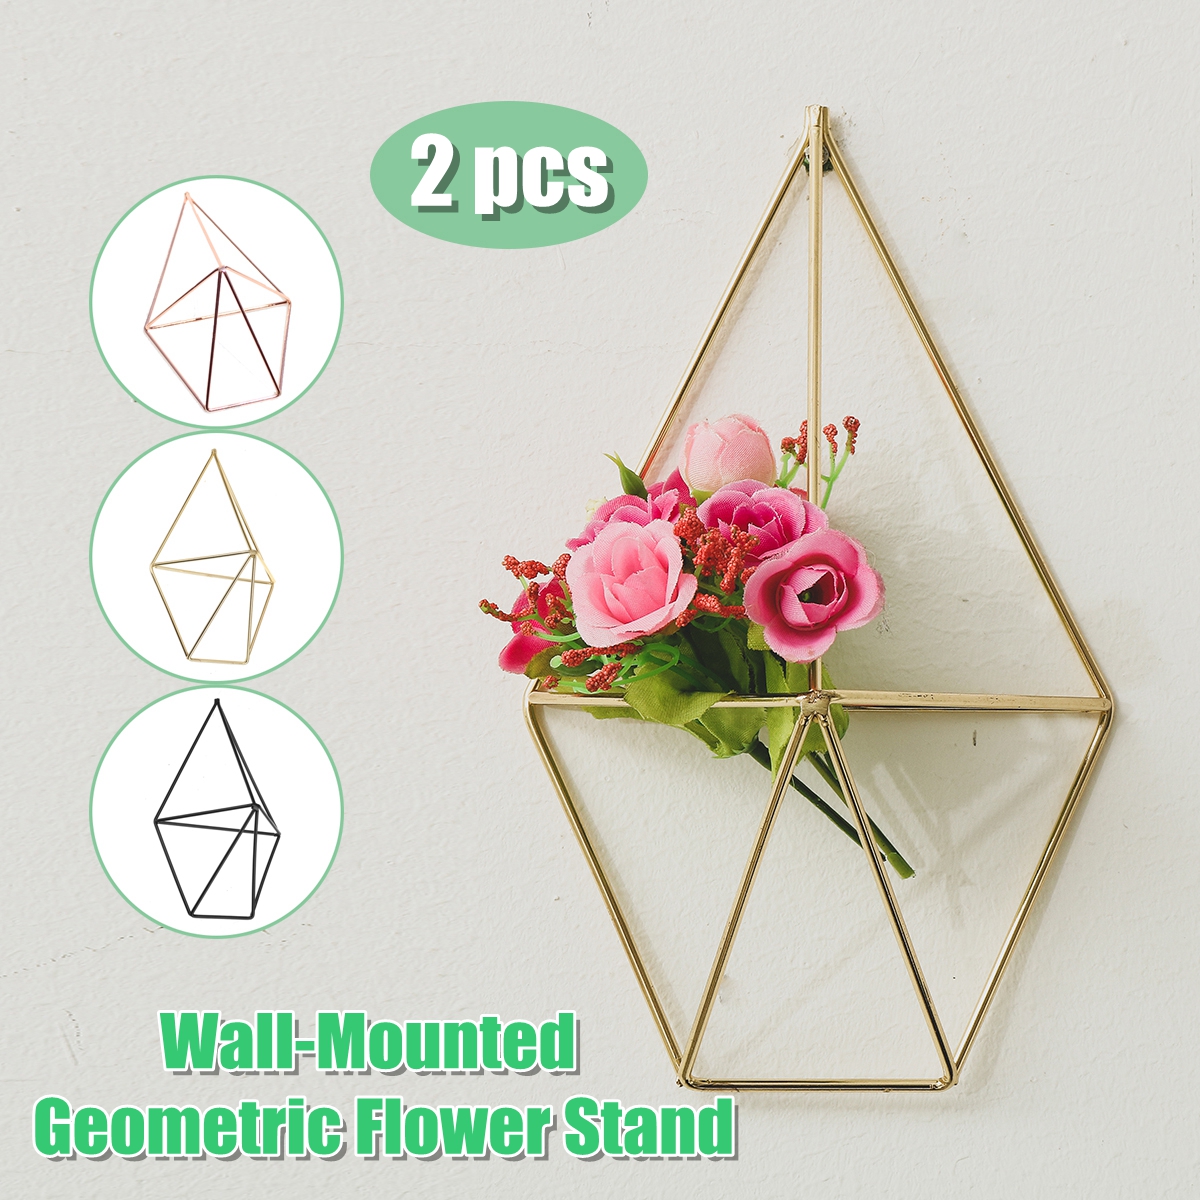 2-Pcs-Wall-Mounted-Geometric-Flower-Stand-Wall-Hanging-Wrought-Iron-Plant-Storage-Rack-Holder-Home-O-1736564-1